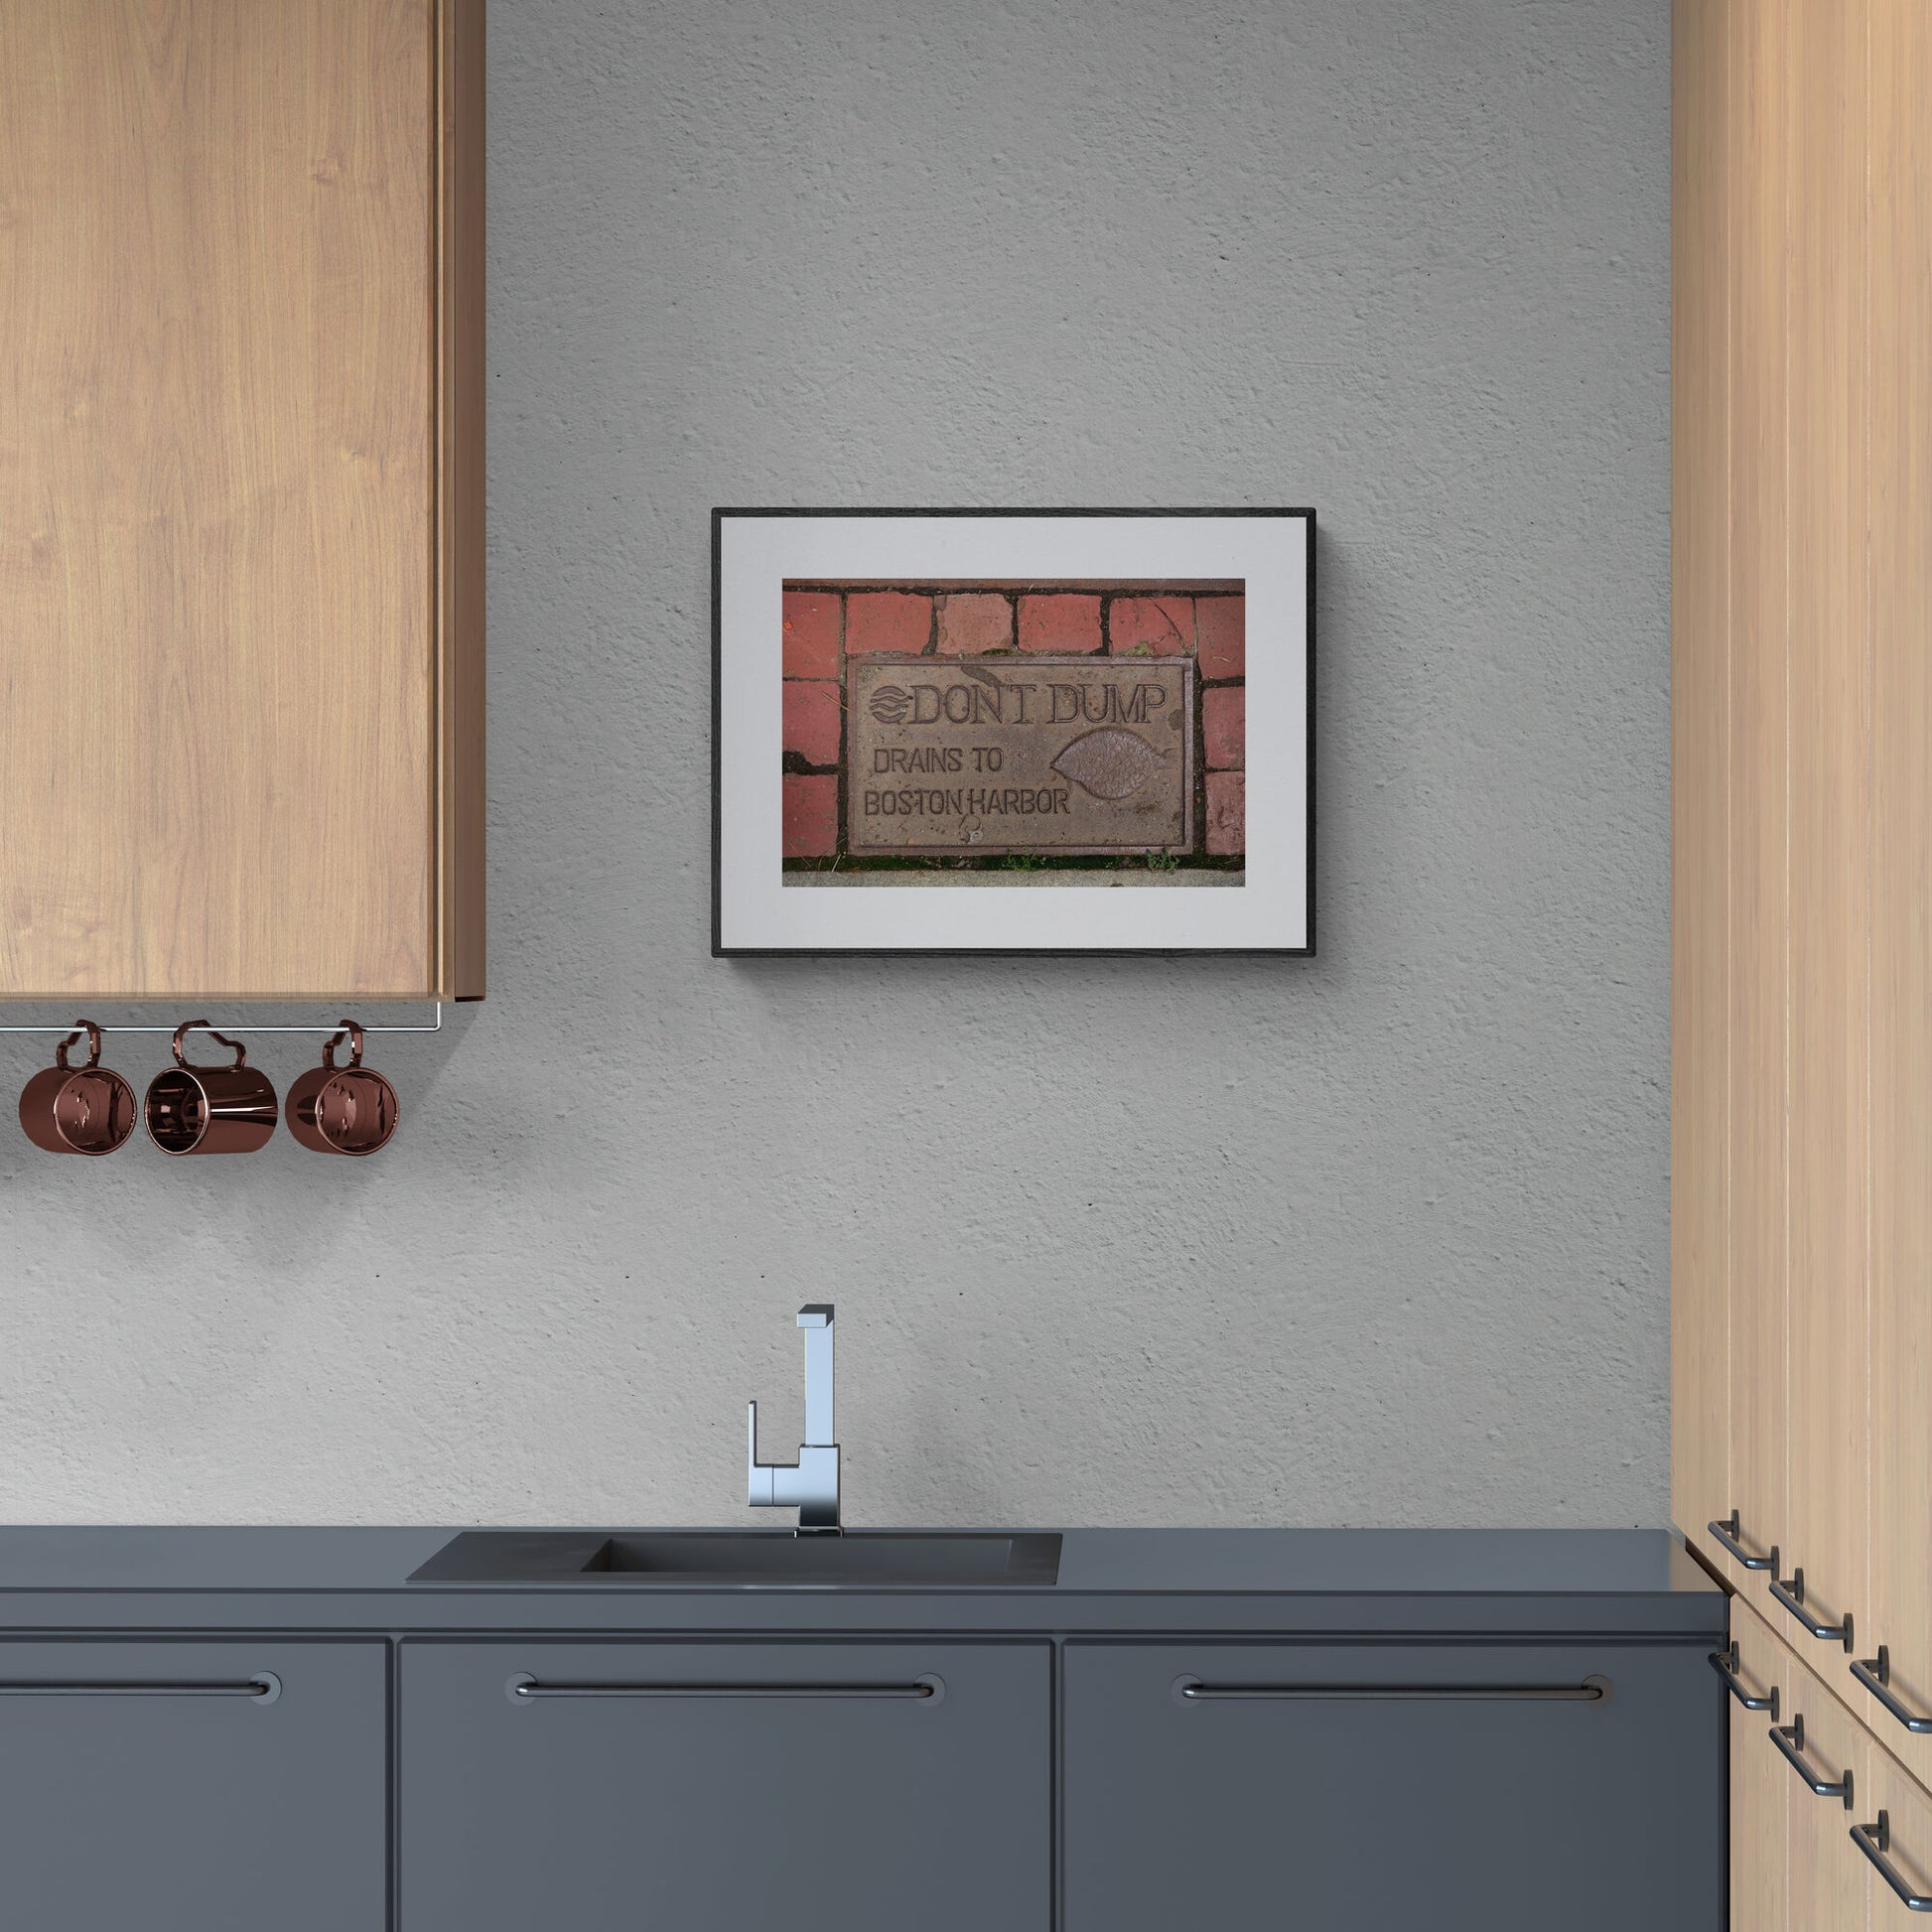 Photograph of Boston Harbor Sign in a kitchen wall art